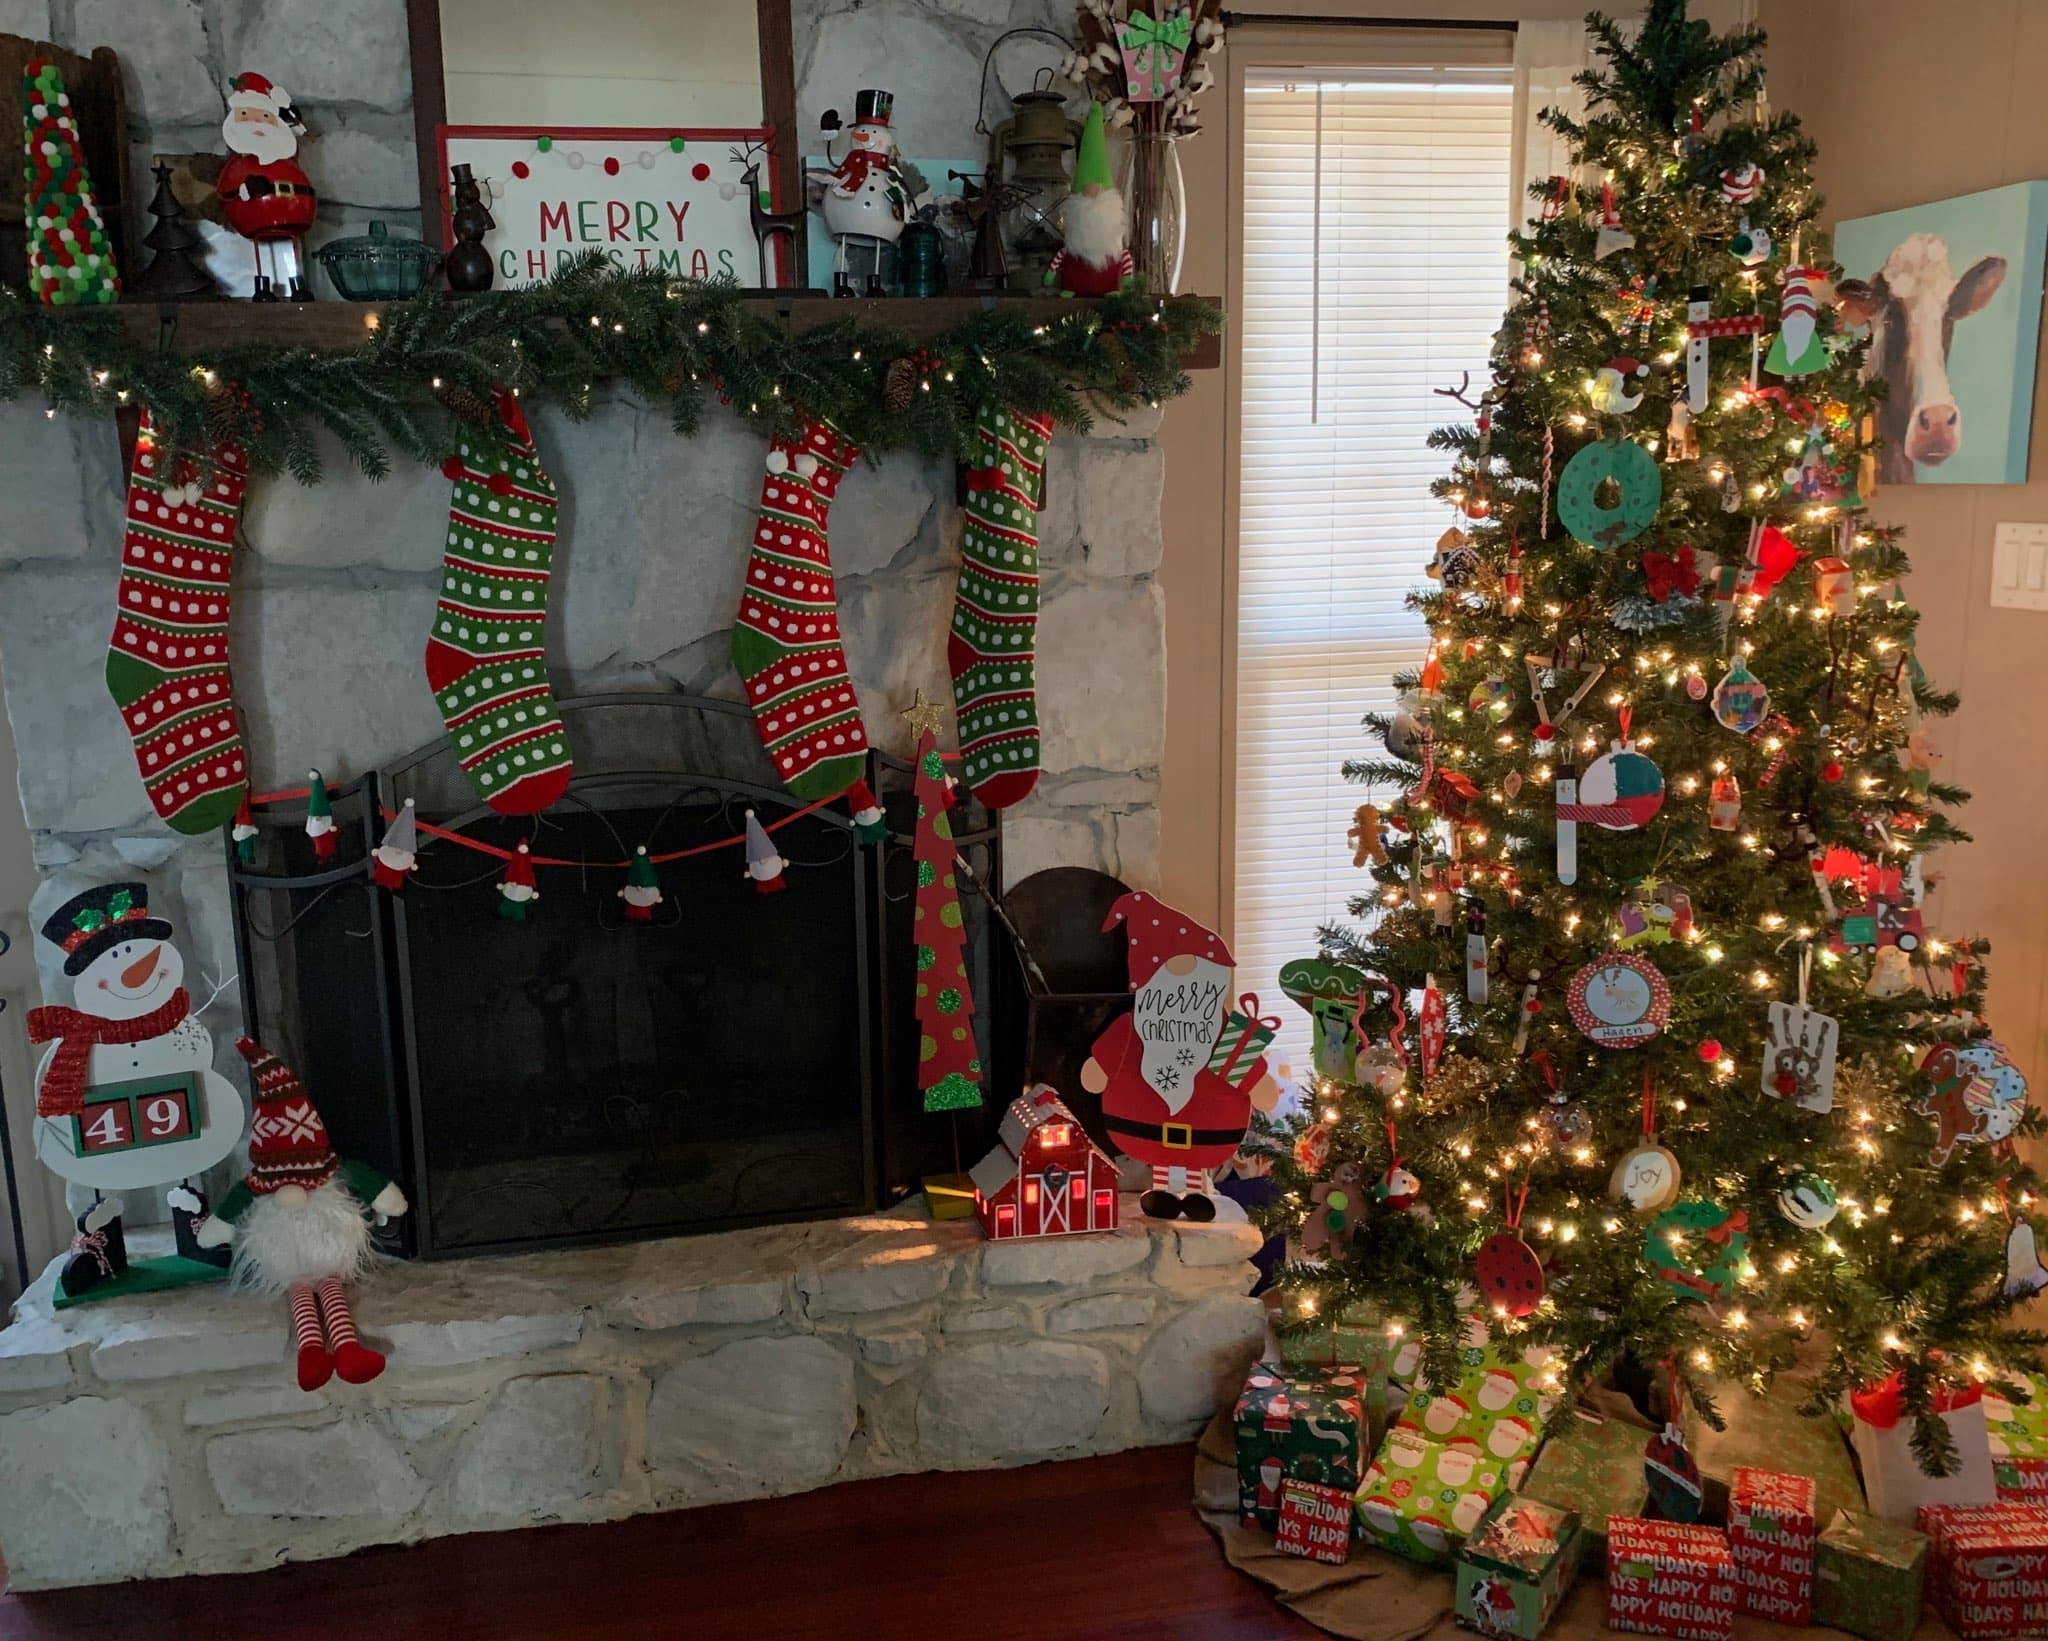 Home Services: Planning for a healthier holiday season